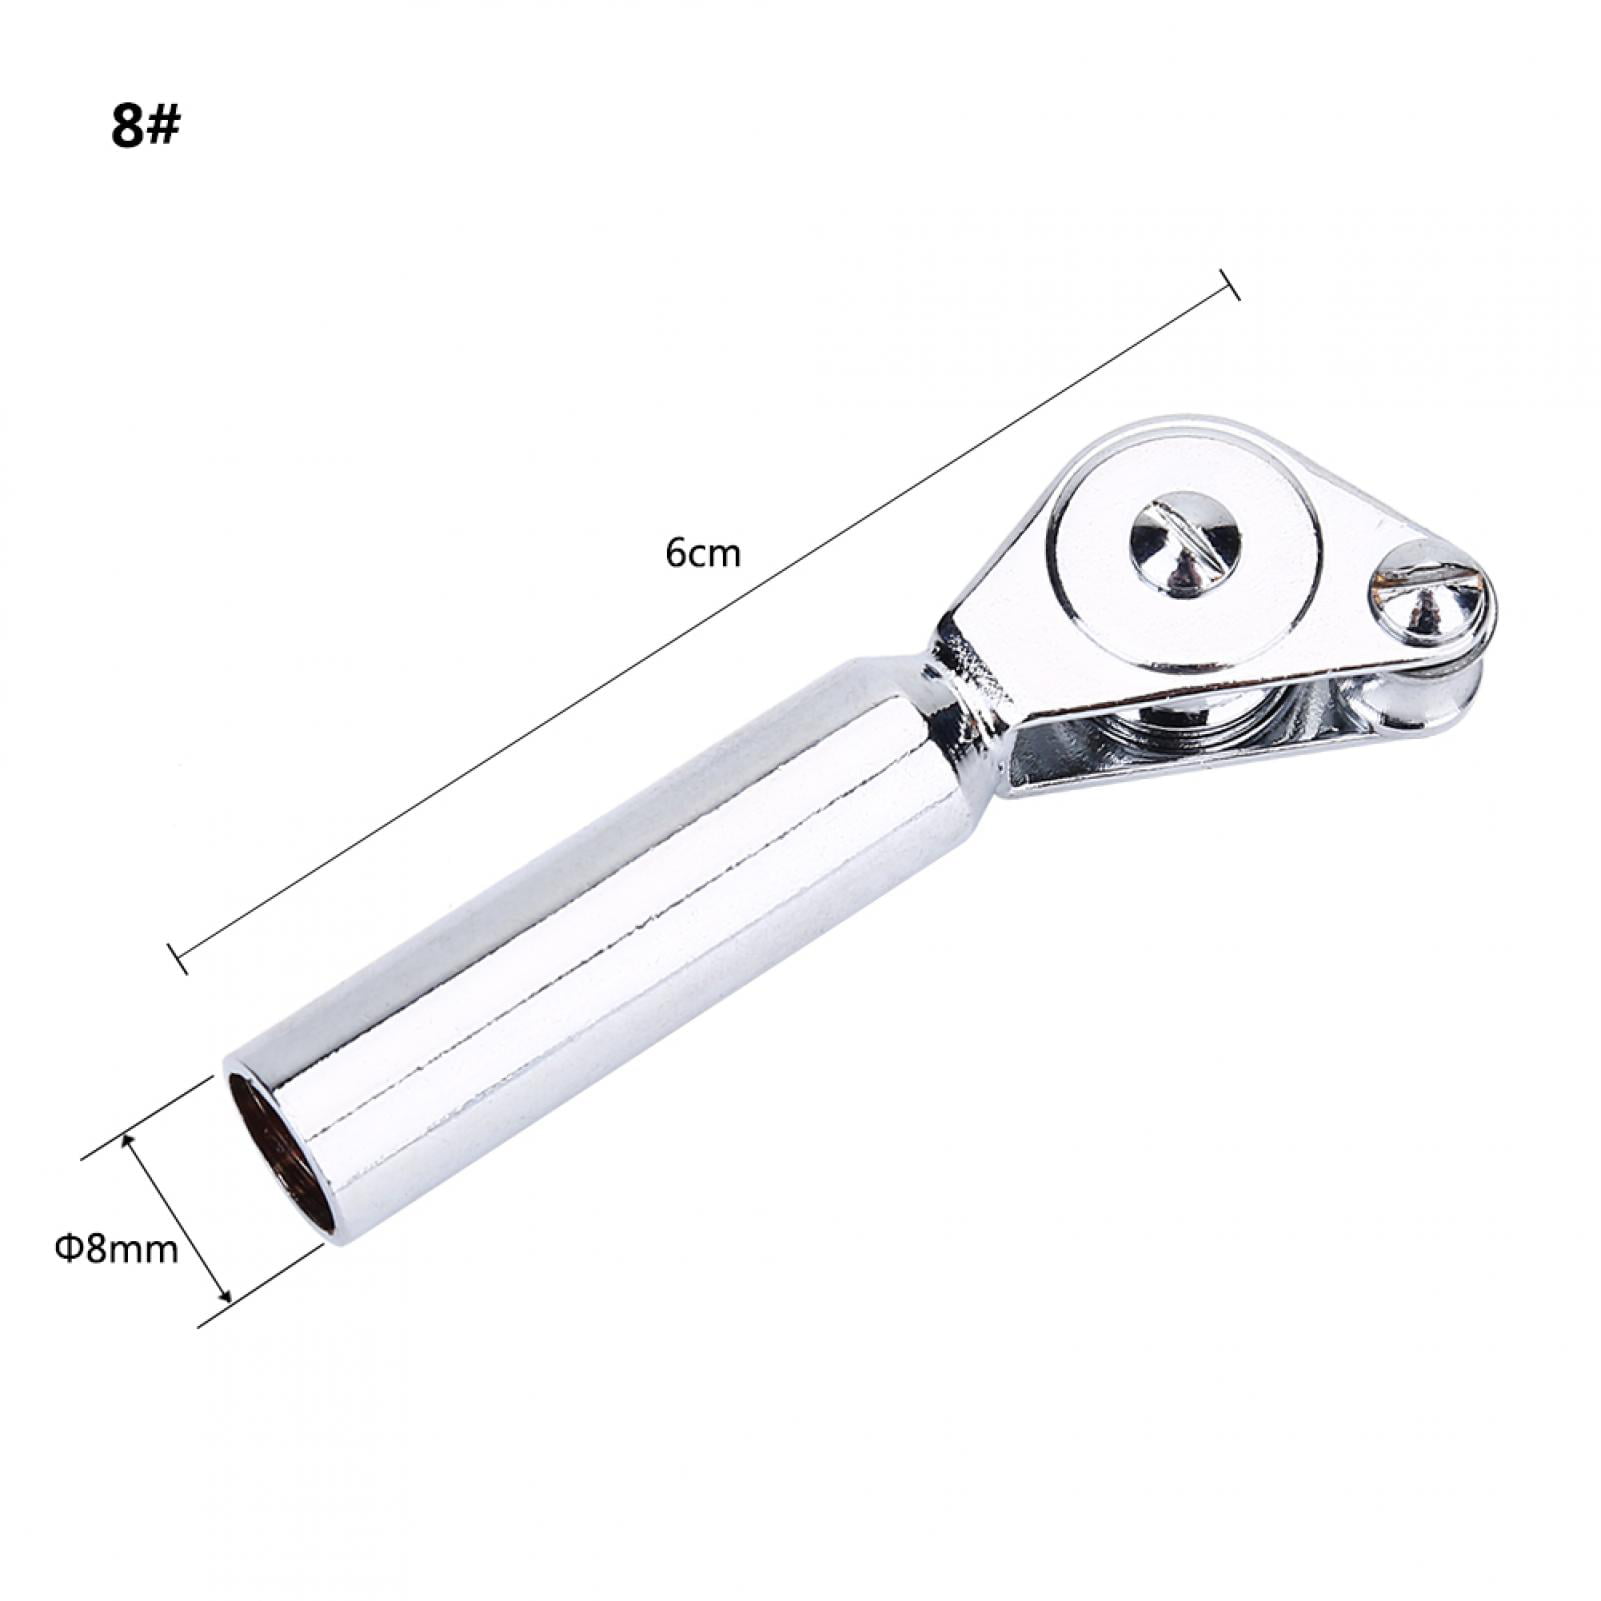 Stainless Steel Roller Rod Tip Guide Sea Boat Fishing Trolling Tackle  Accessory, Stainless Steel Rod Tip Guide, Roller Rod Tip Guide 